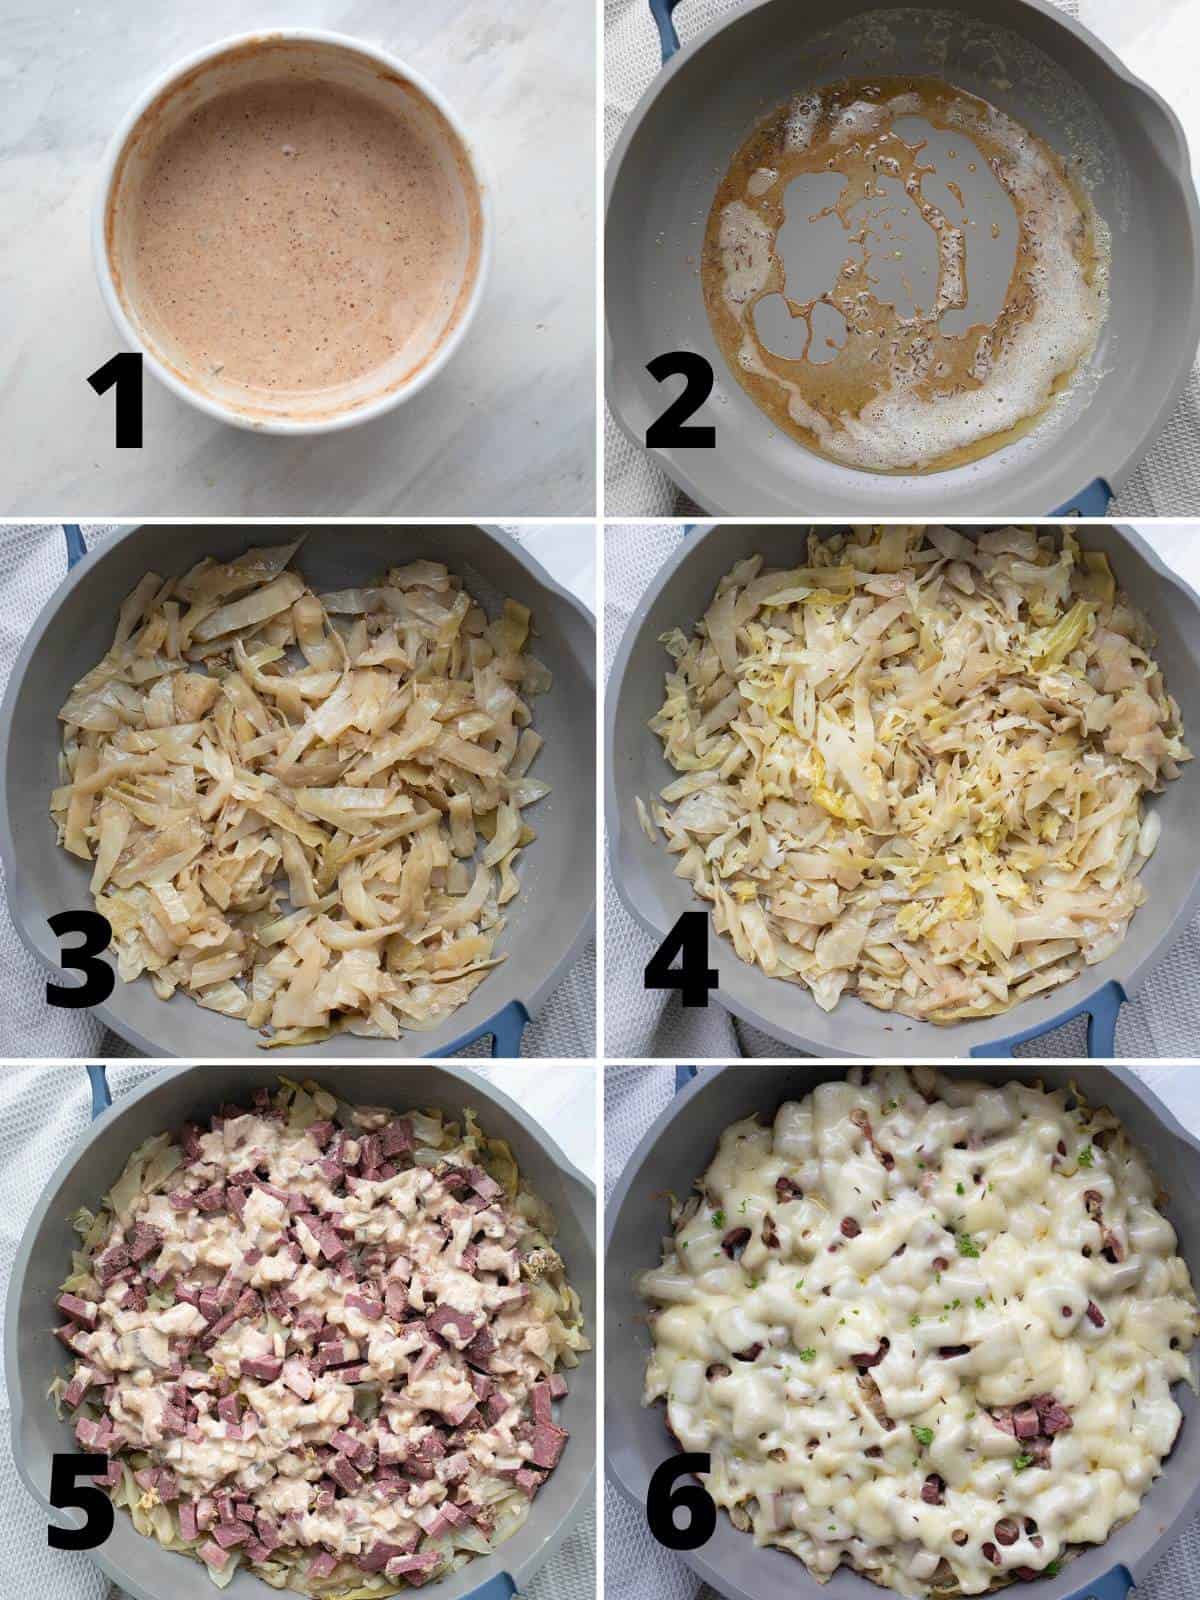 A collage of 6 images showing the steps for making Reuben Casserole.